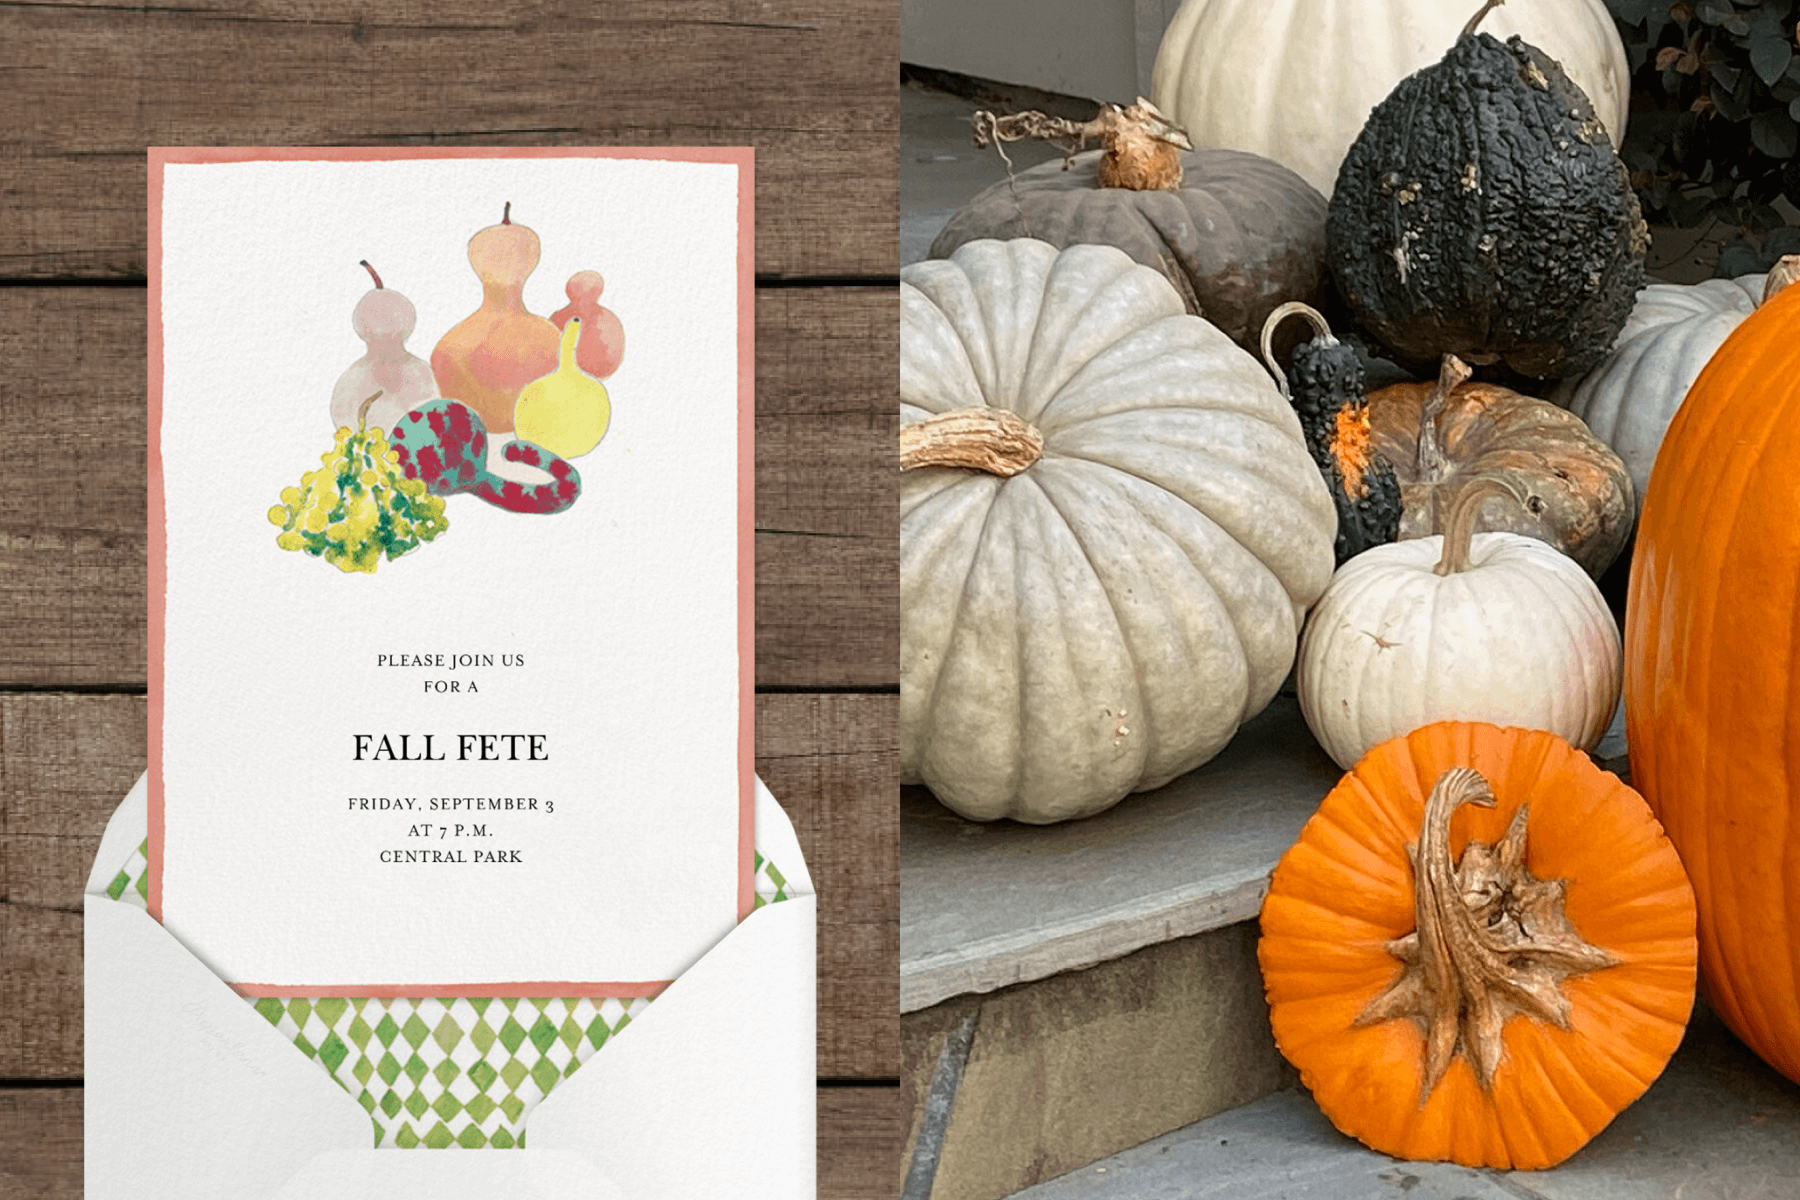 Left: A fall invitation with a colorful illustration of gourds; right: A close up photo of pumpkins and gourds on a stoop.